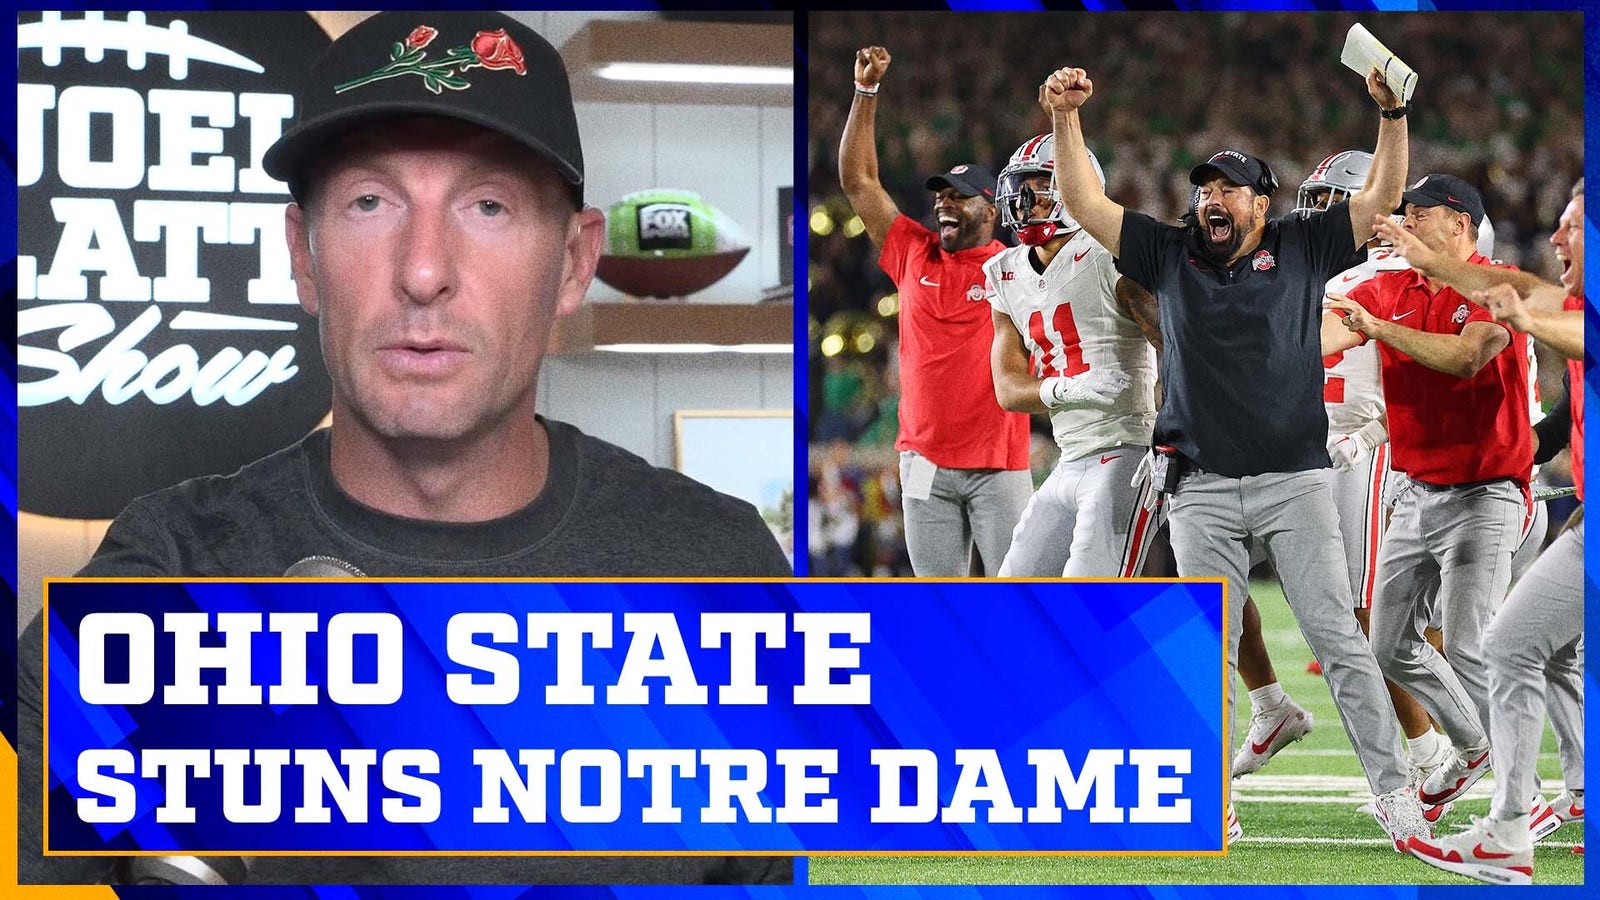 Joel Klatt reacts to Ohio State's stunning victory over Notre Dame in South Bend